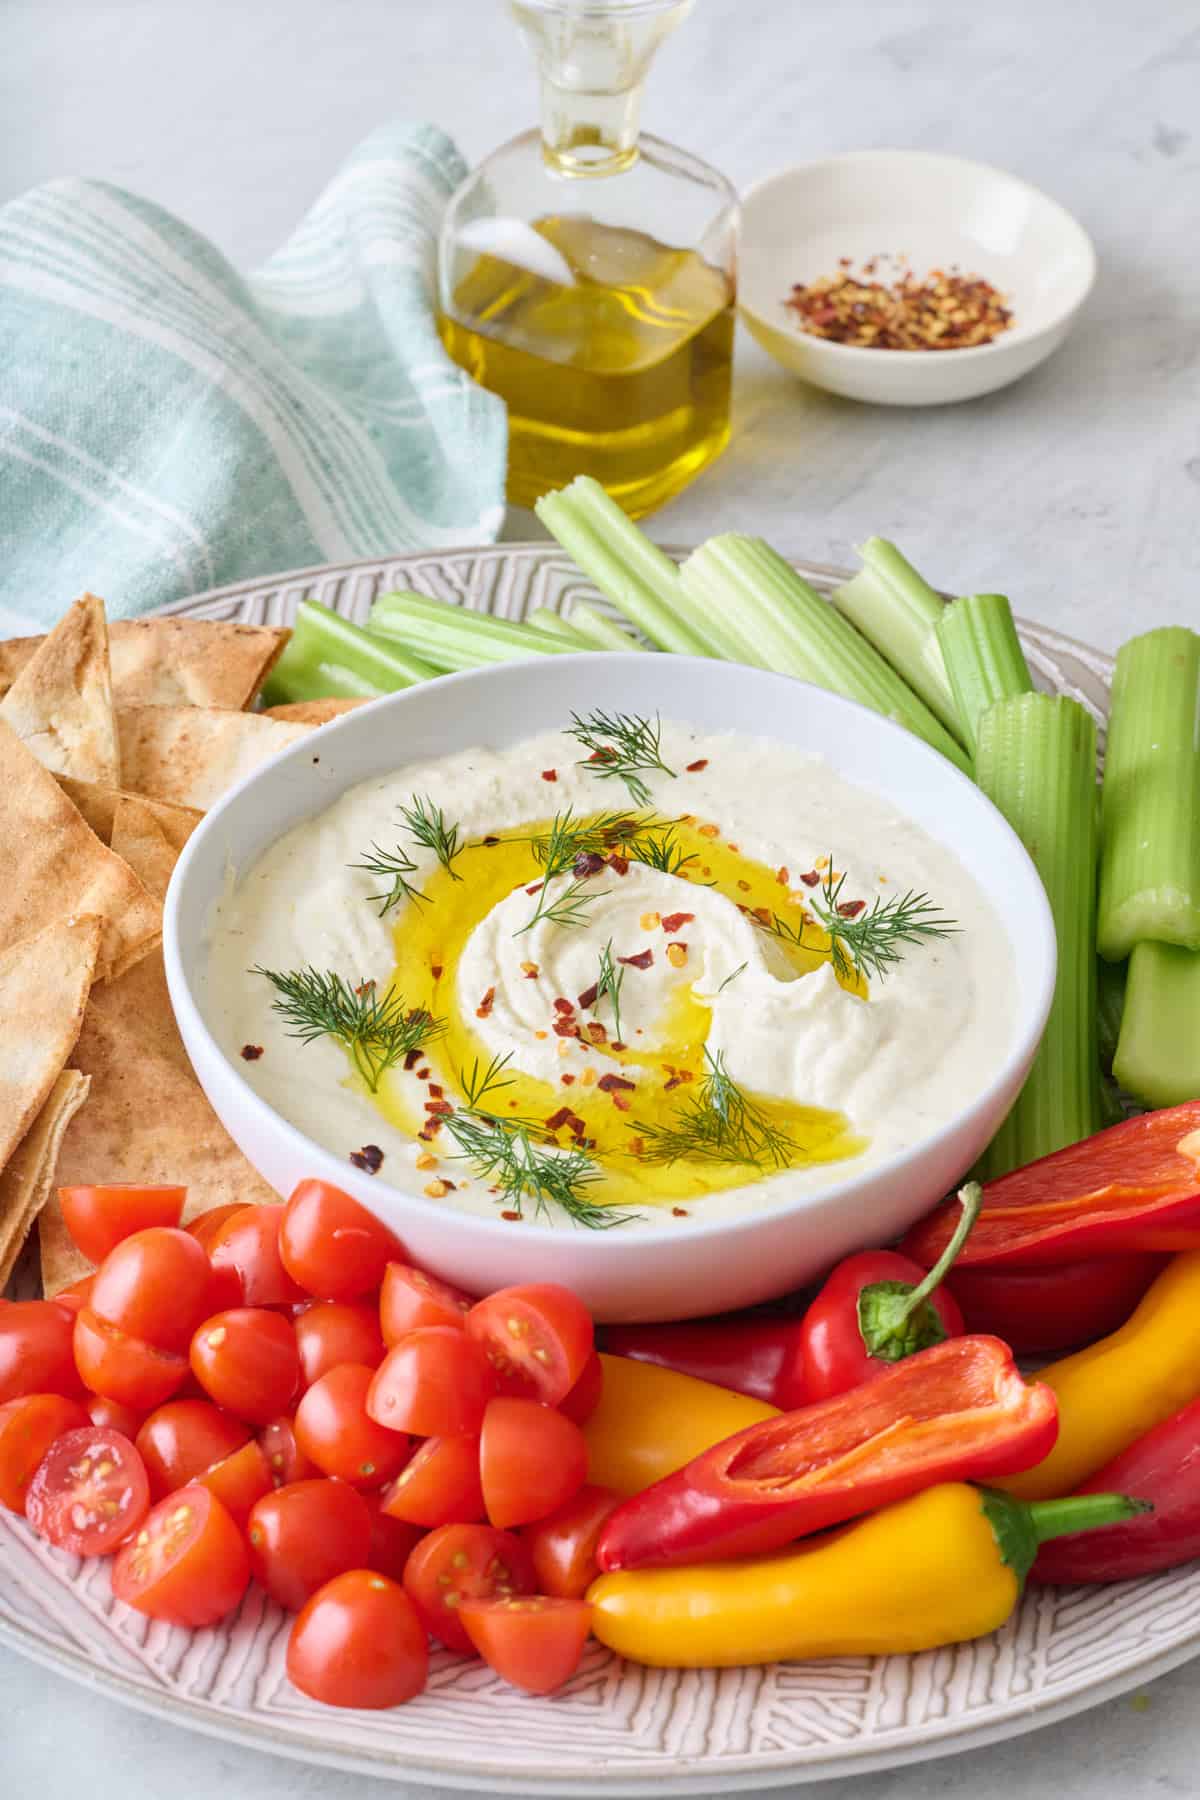 Creamy feta dip topped with oil and fresh dip on a platter with cherry tomatoes, peppers, celery sticks and pita chips.